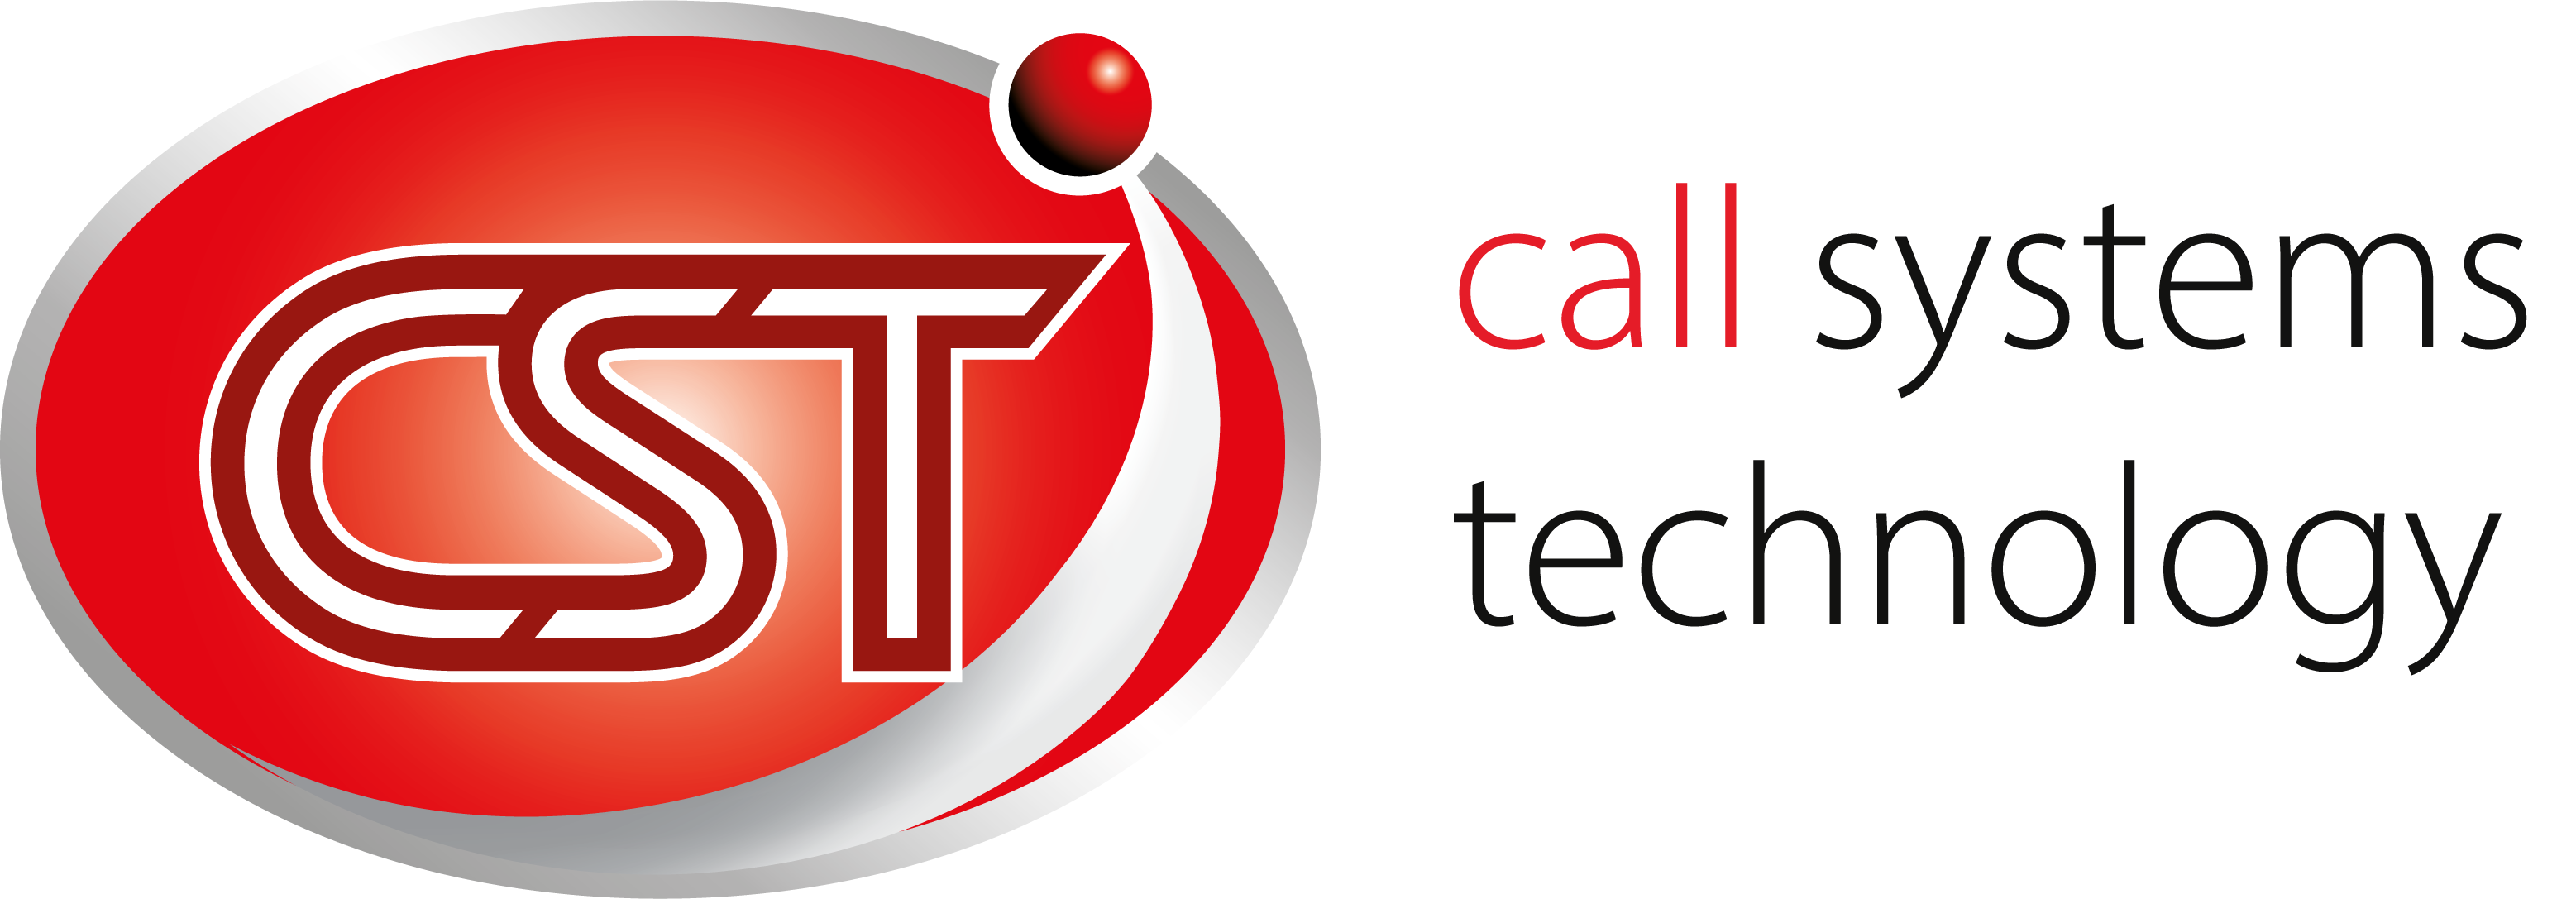 Call-Systems Technology Limited